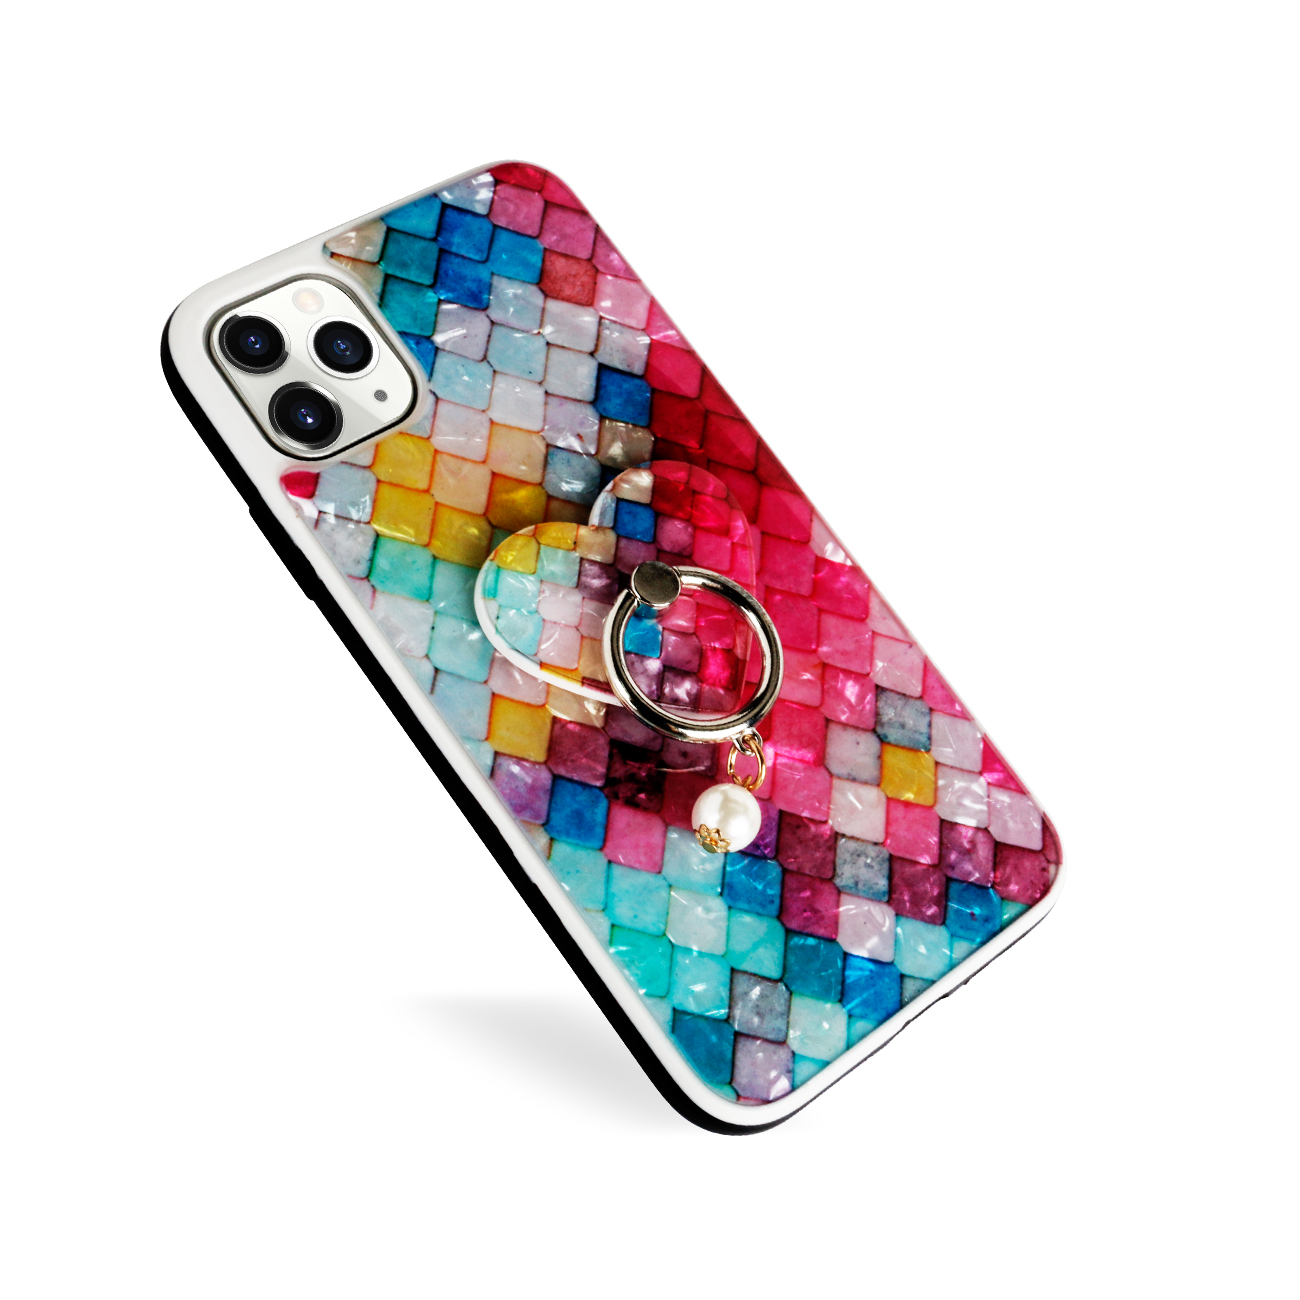 Heart Design RING Stand Fashion Case for iPhone 11 6.1 (Cube)